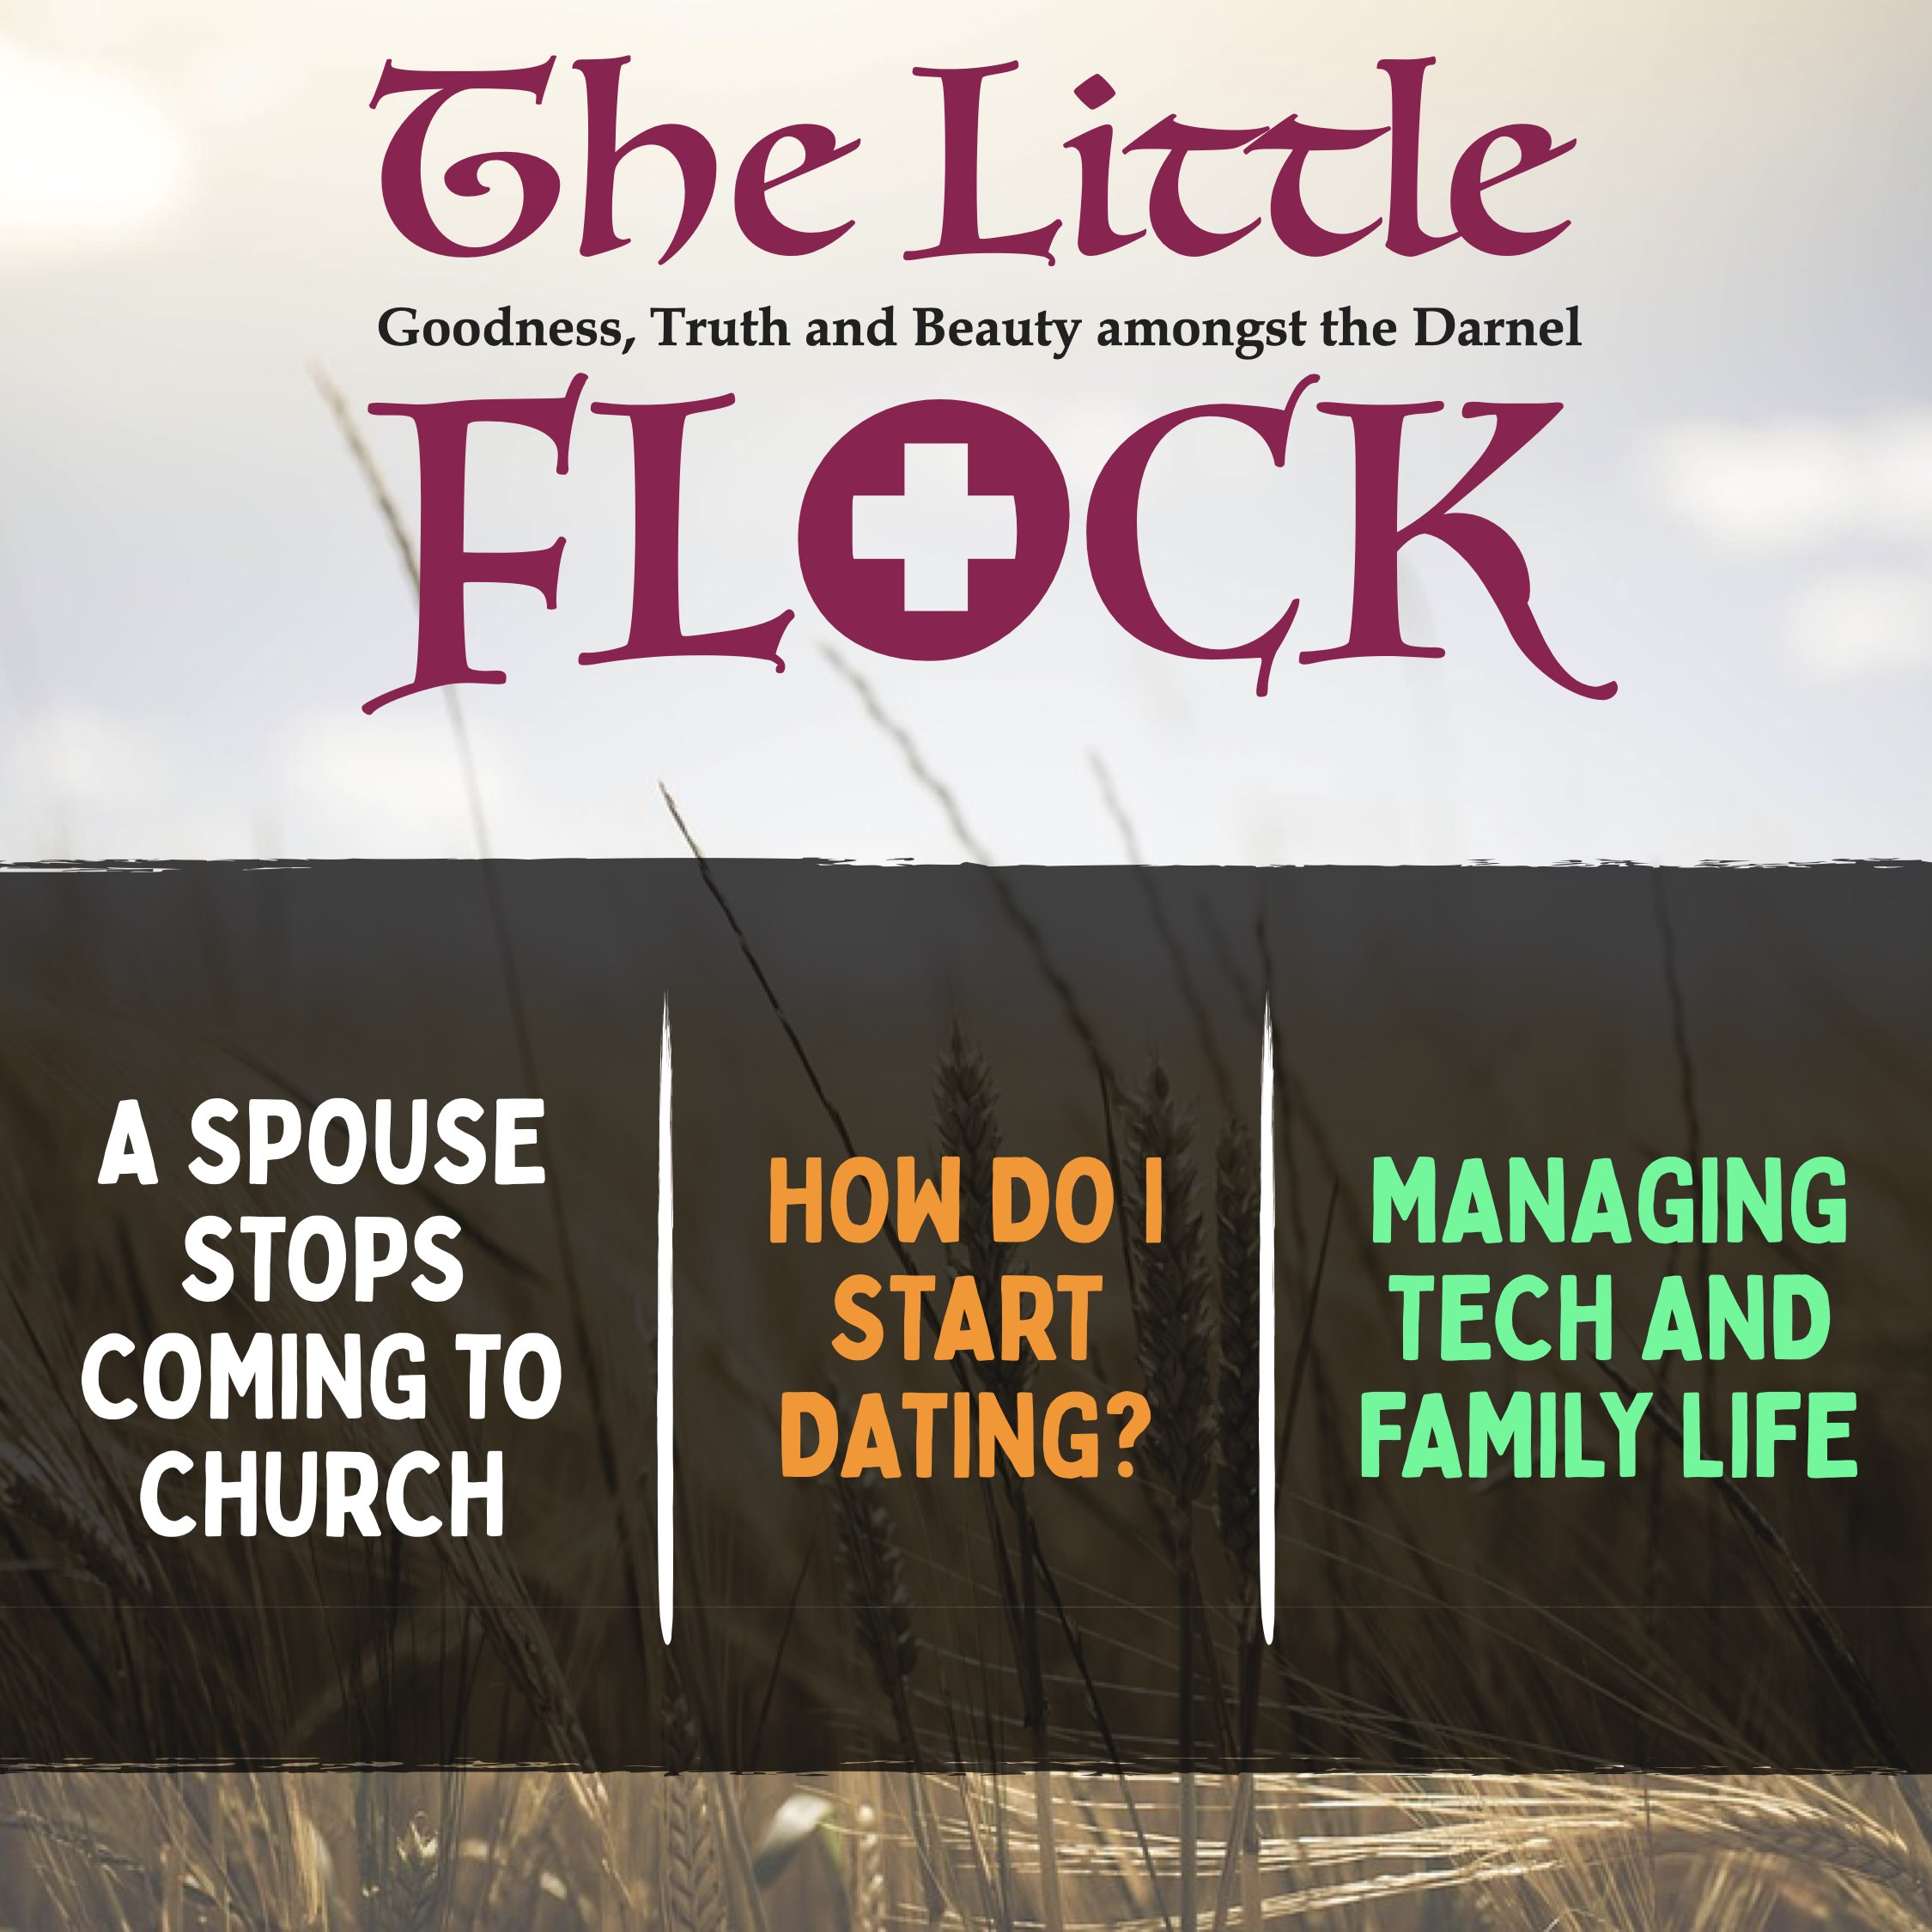 4. A Spouse Stops Coming to Church, How to Start a Relationship, Technology and Family Life